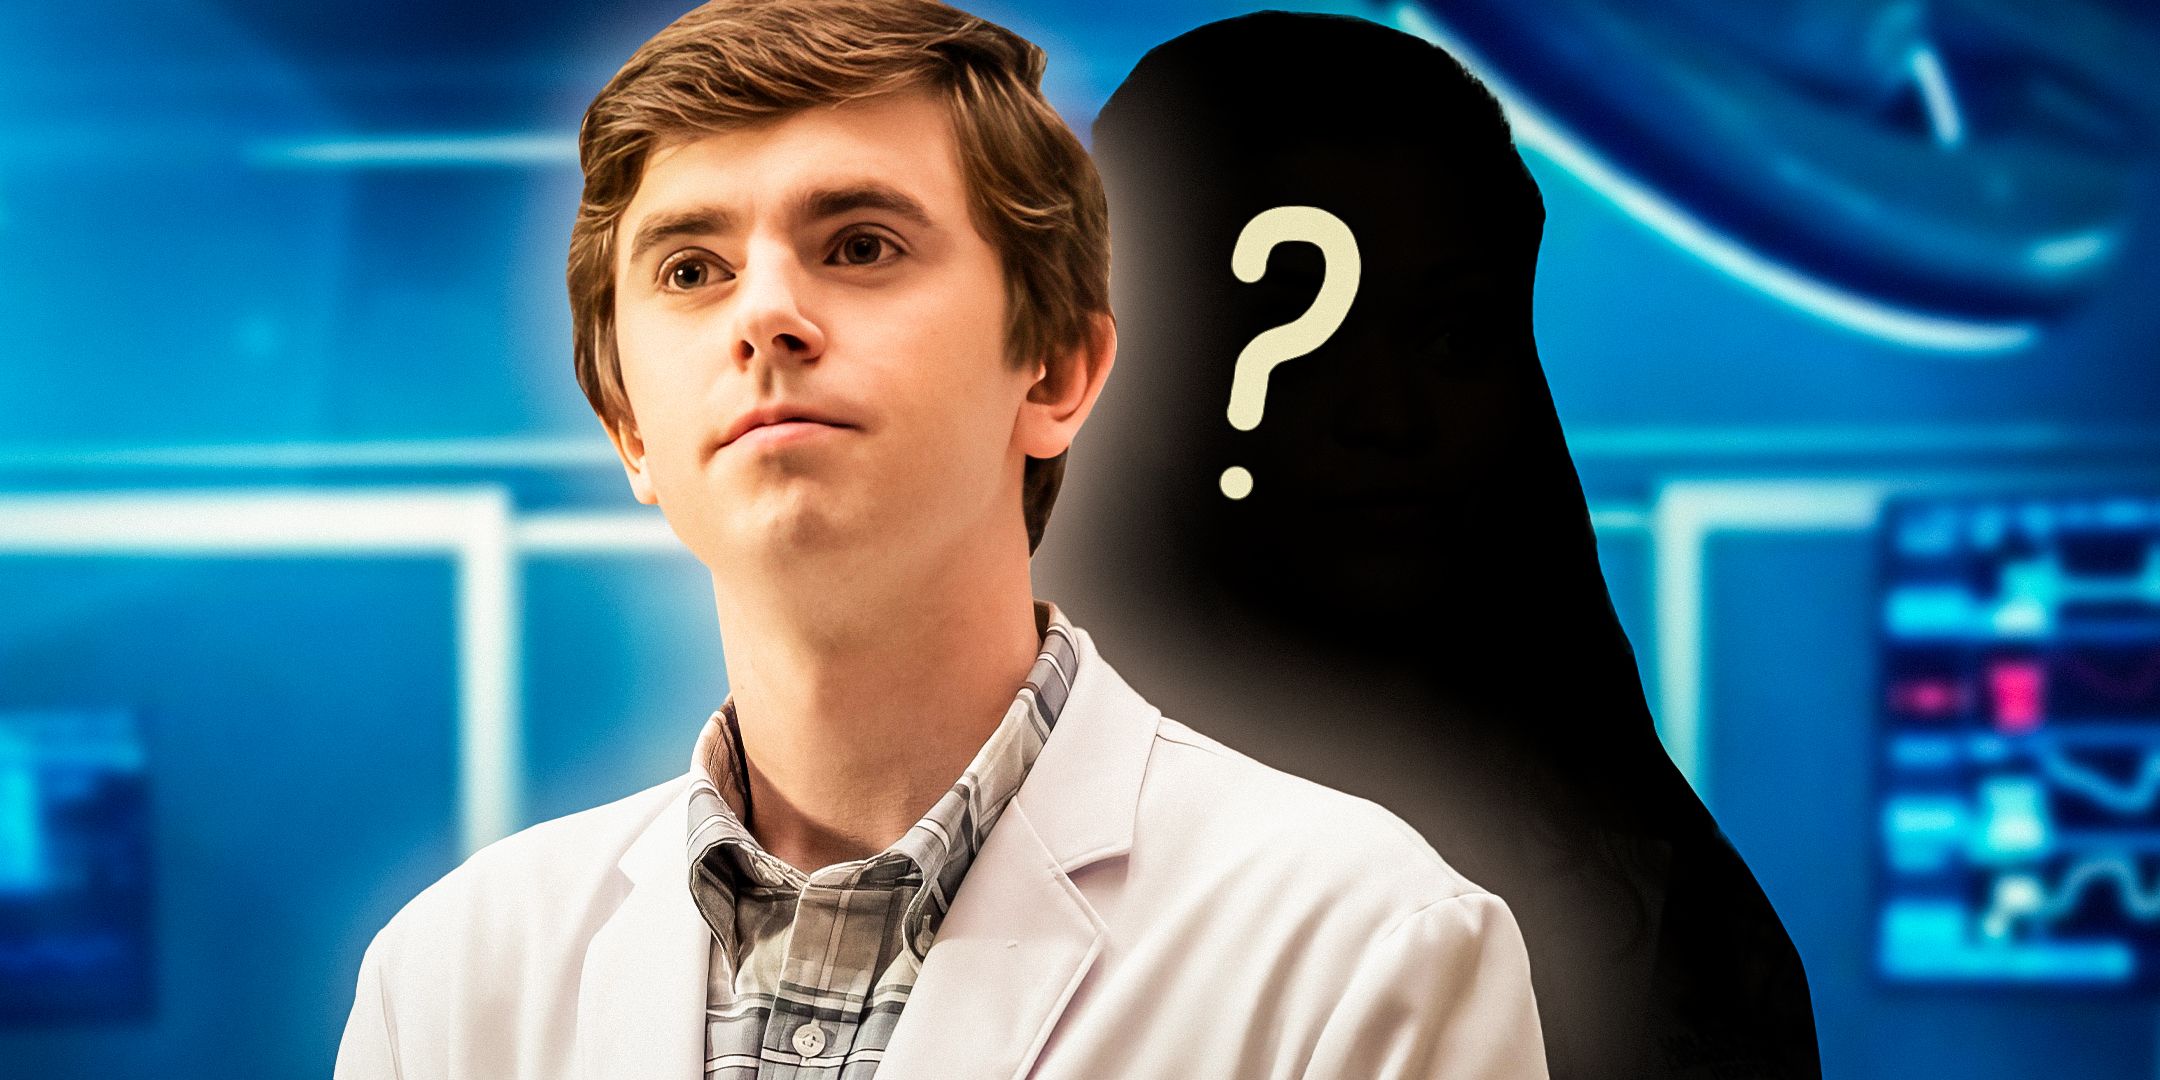 Freddie Highmore as Dr. Shaun Murphy in The Good Doctor looking confused with mystery figure behind him